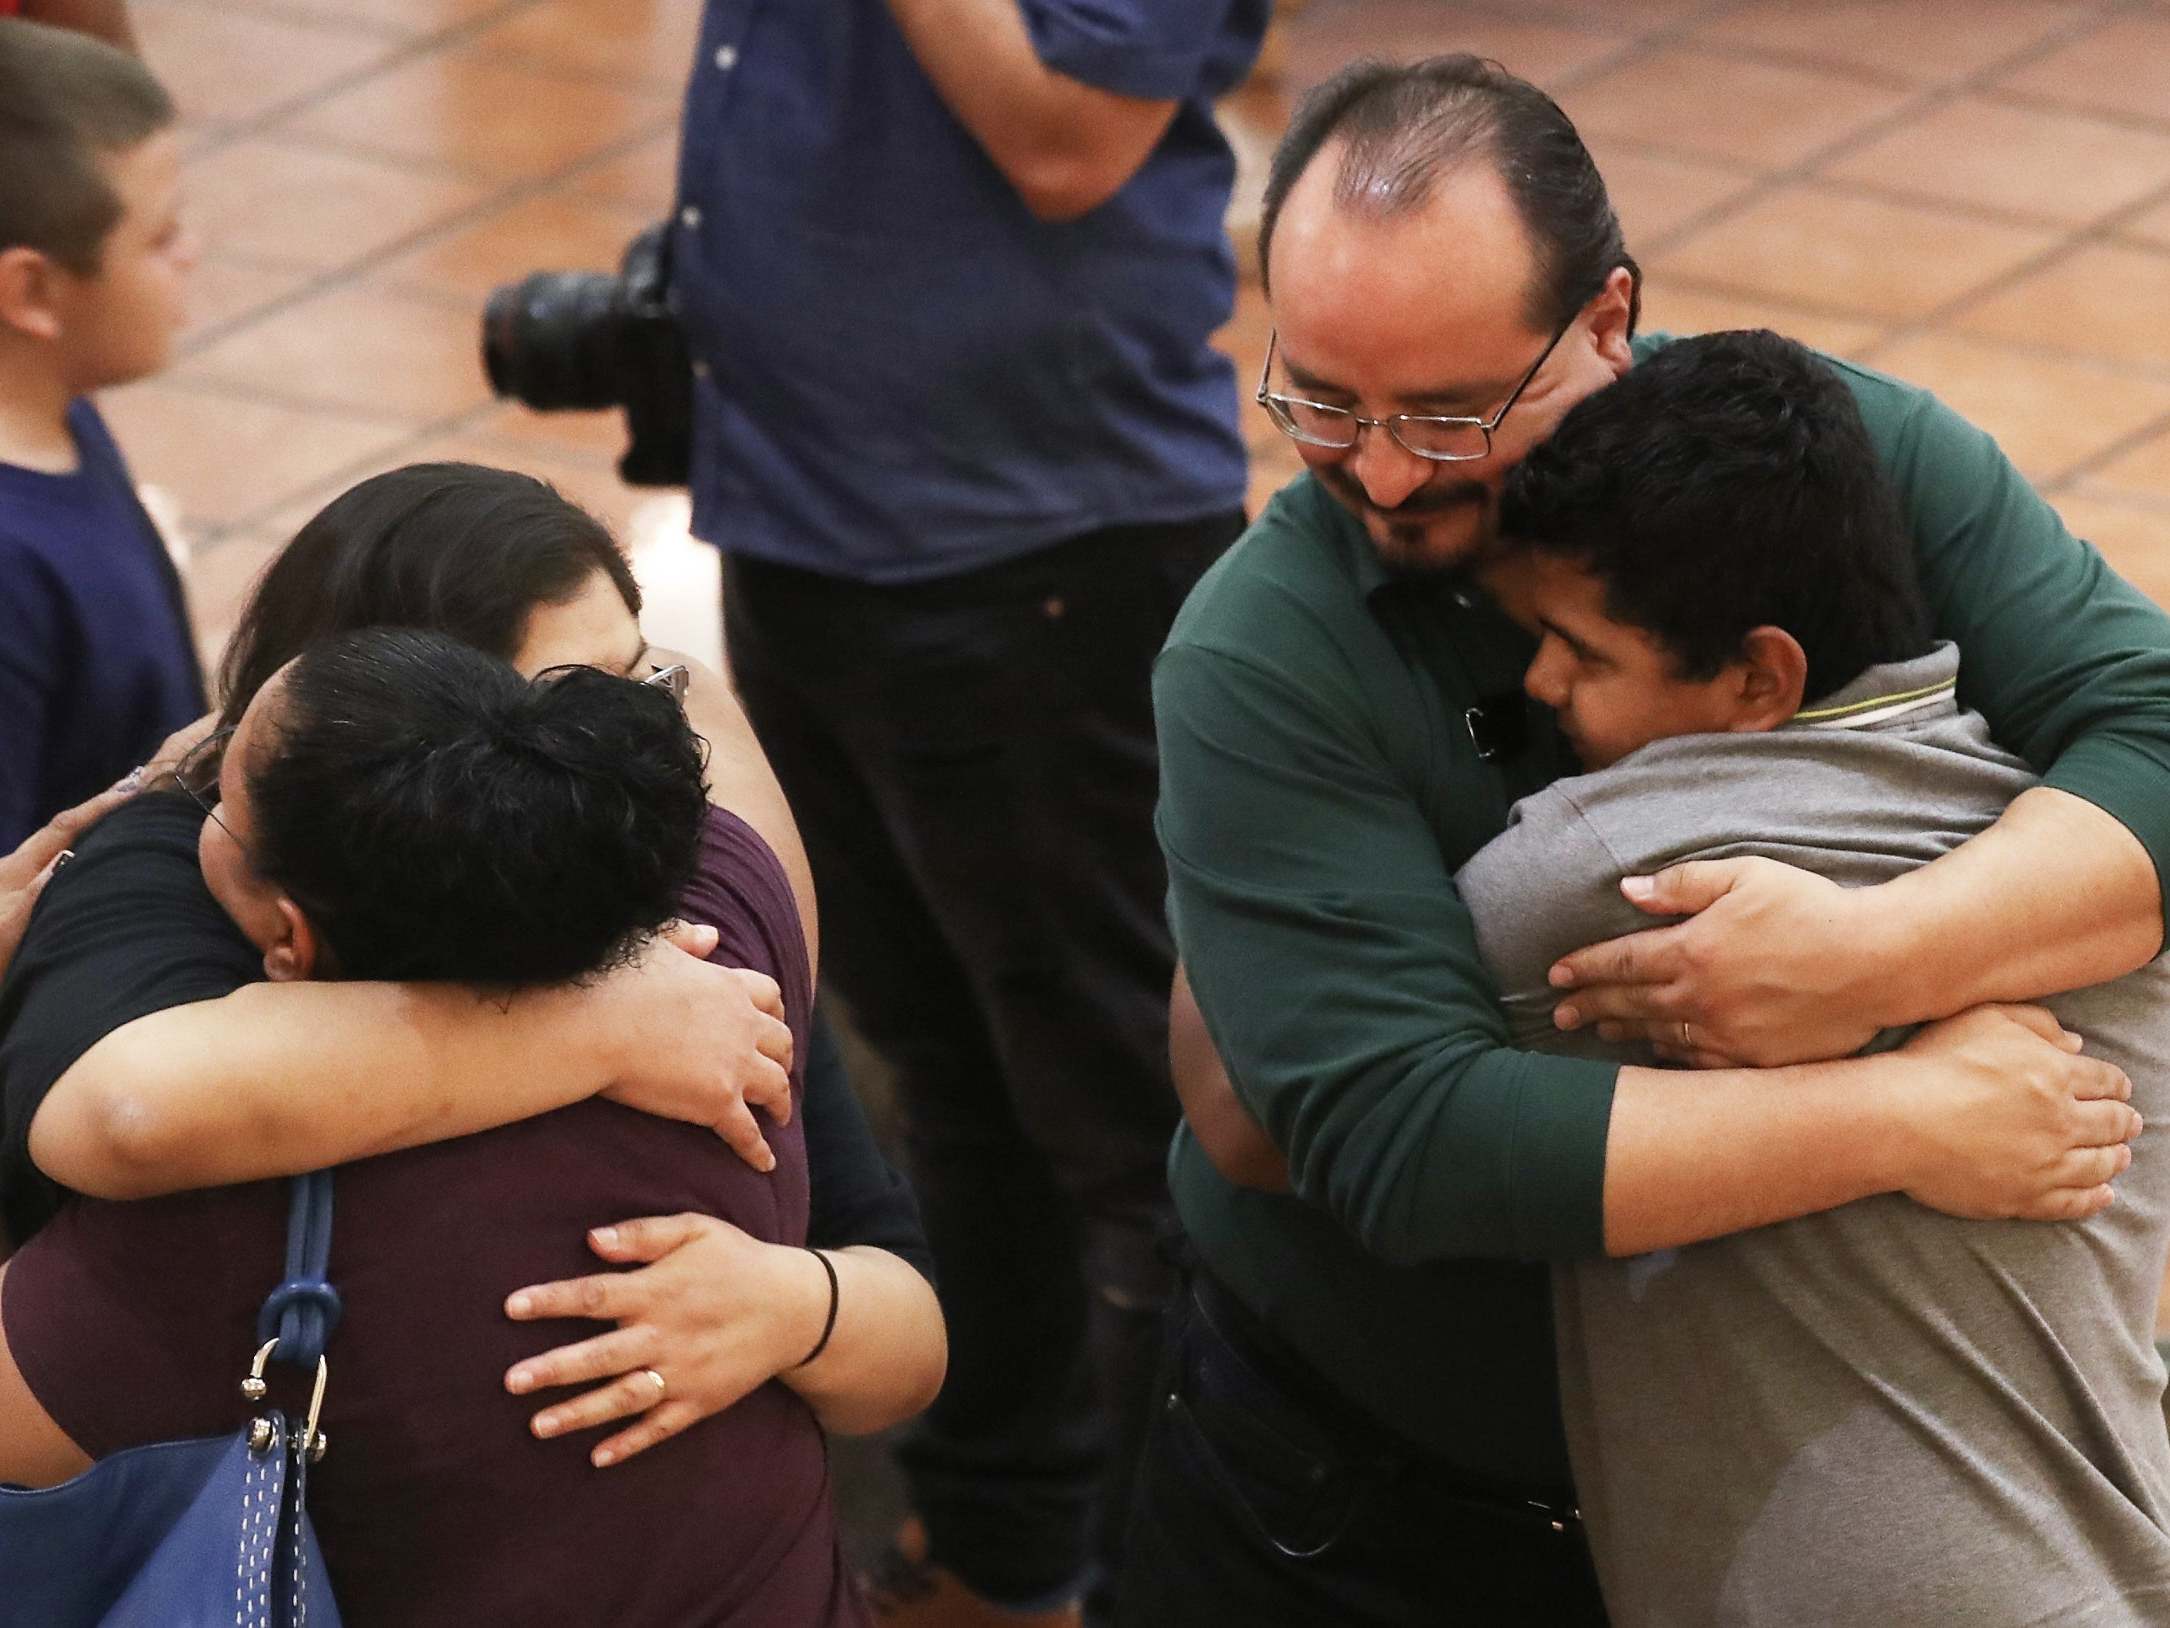 People hug at a vigil for victims of the shootings, which left 20 people dead and dozens wounded